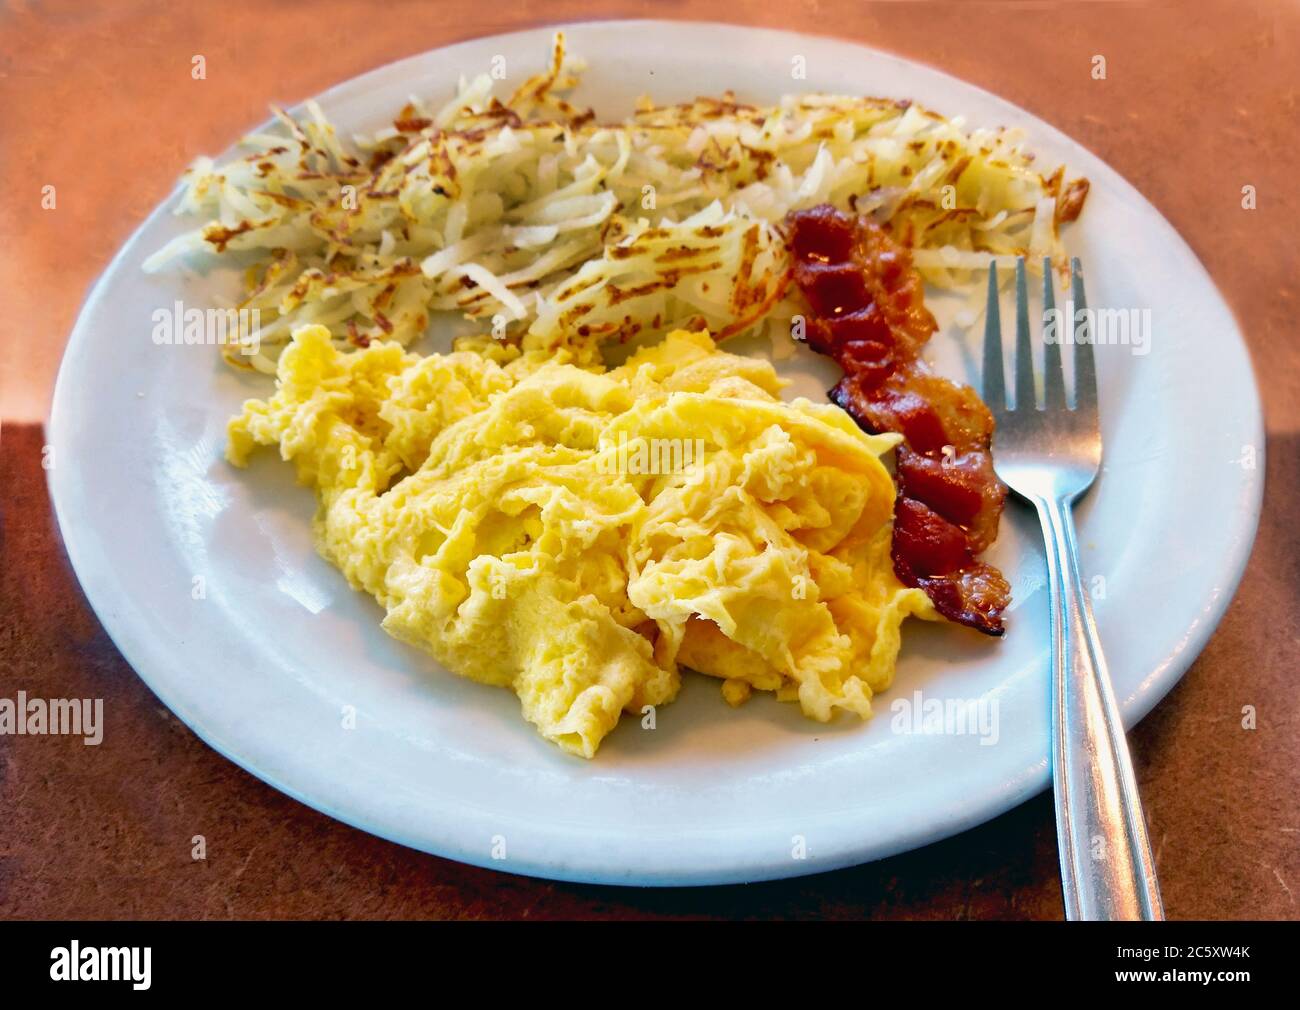 scrambled-eggs-with-bacon-and-a-side-of-crispy-hash-brown-potatoes-for-a-quick-and-hearty-brea...jpg